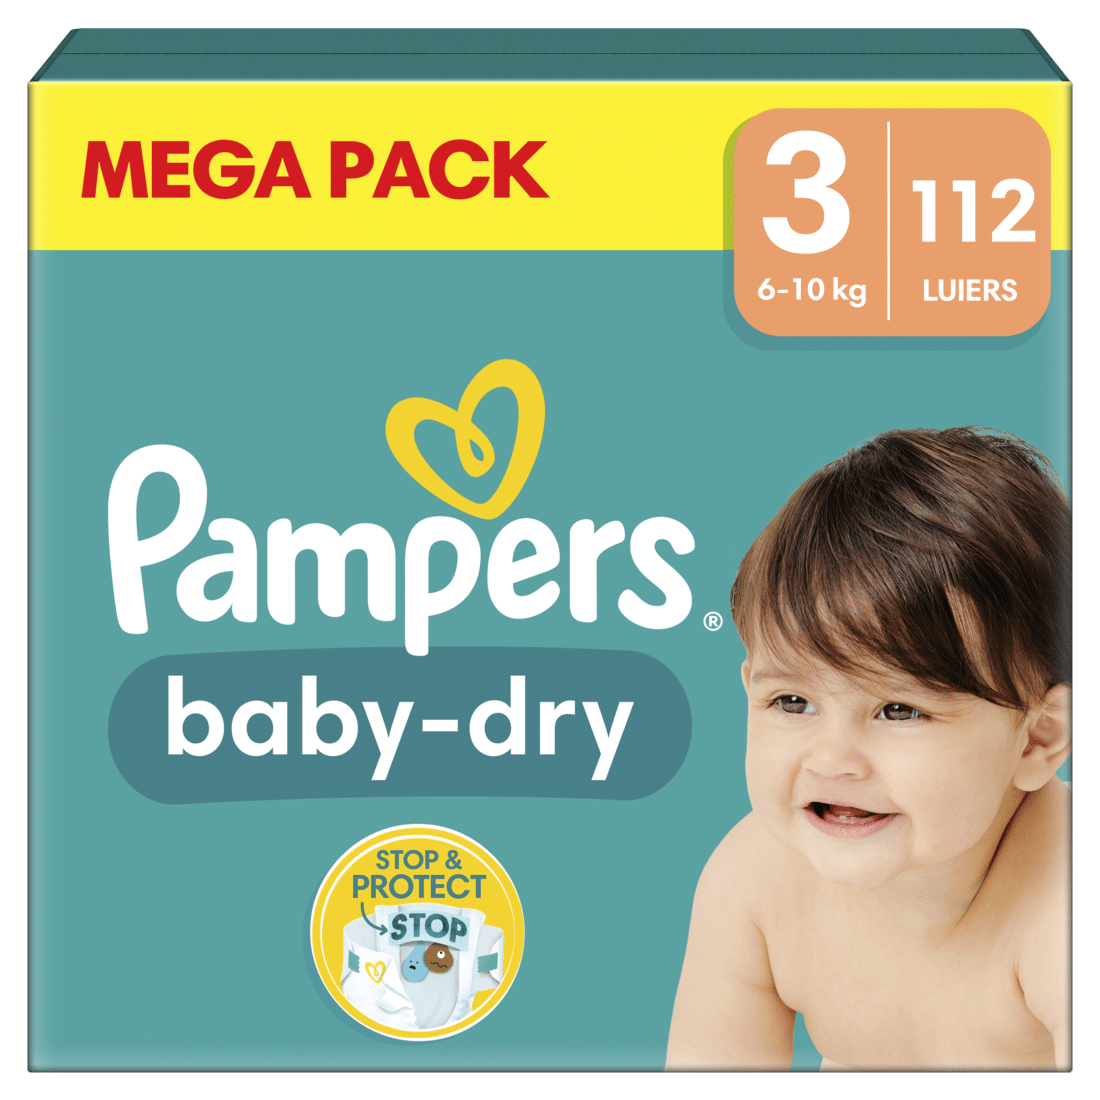 baby love pampers dm